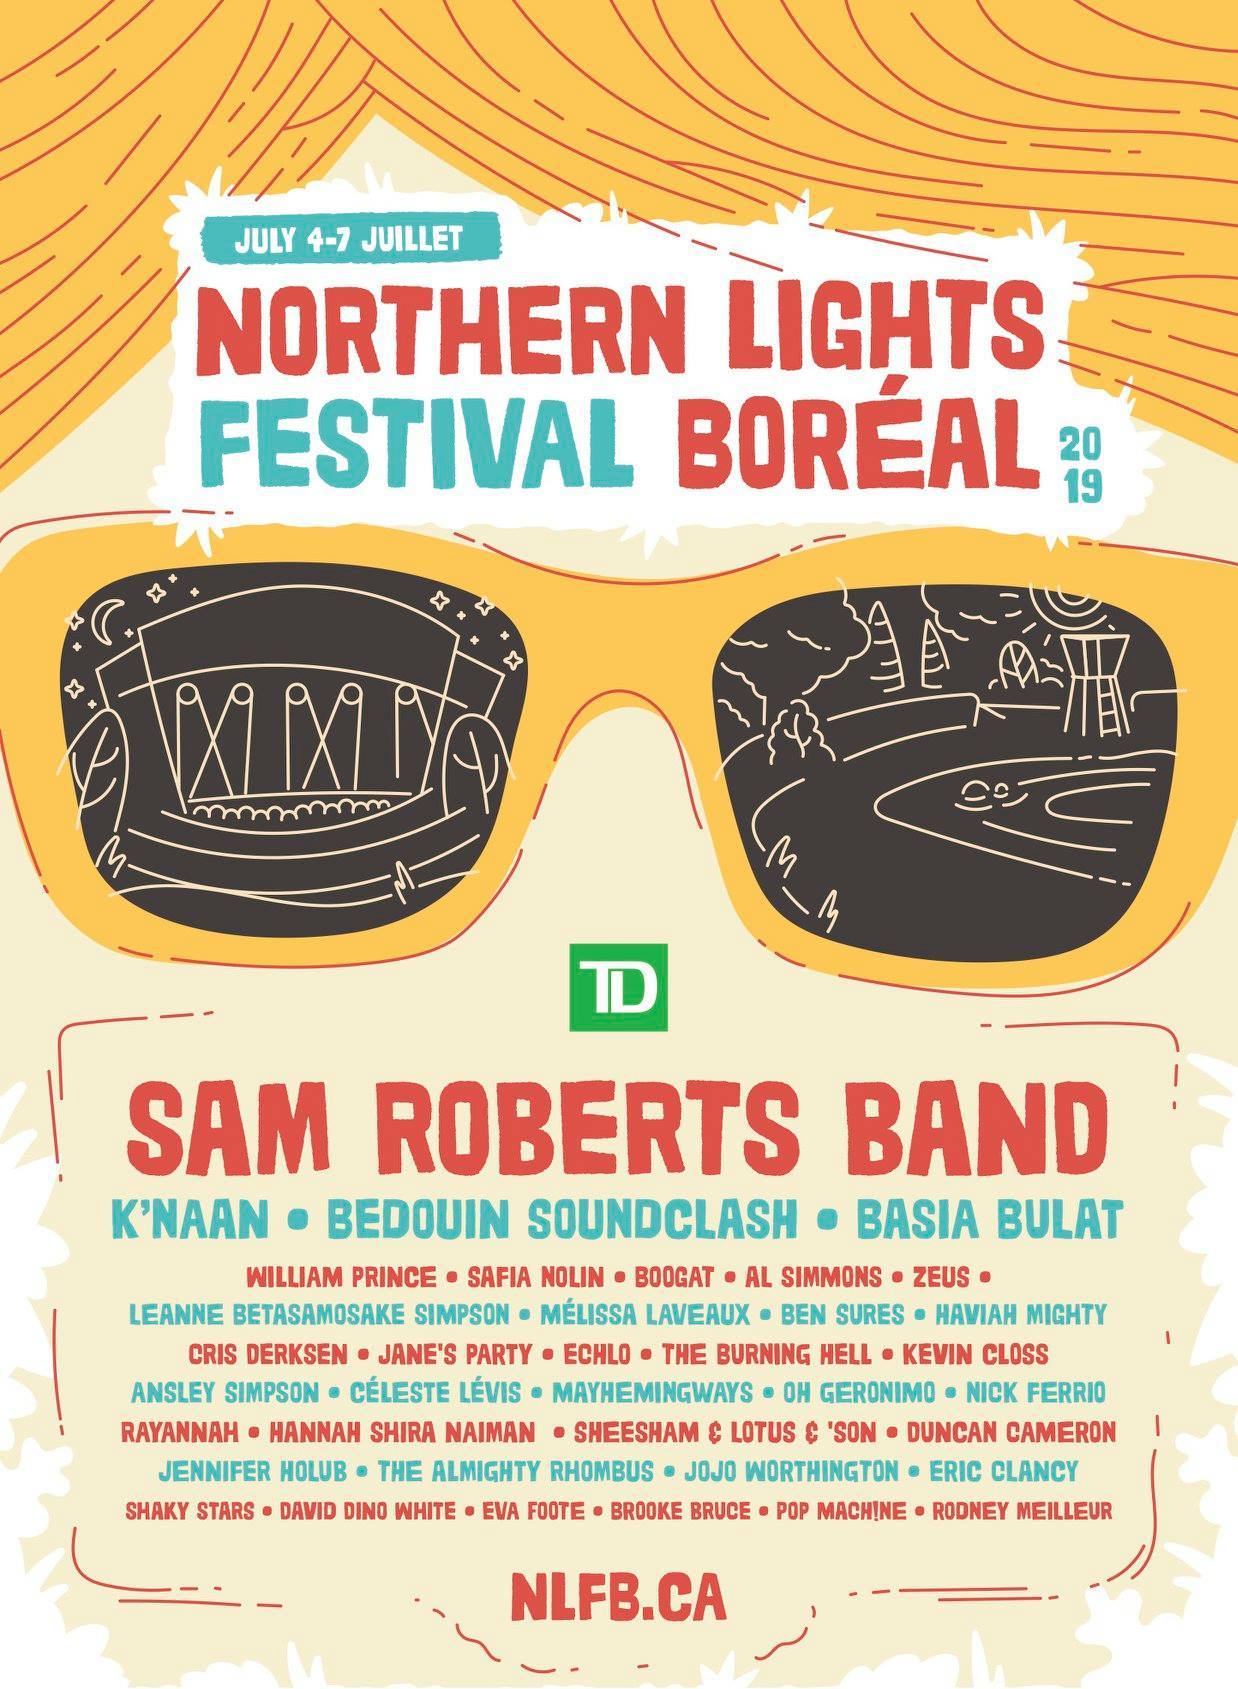 10 ACTS TO CHECK OUT AT NLFB 2019